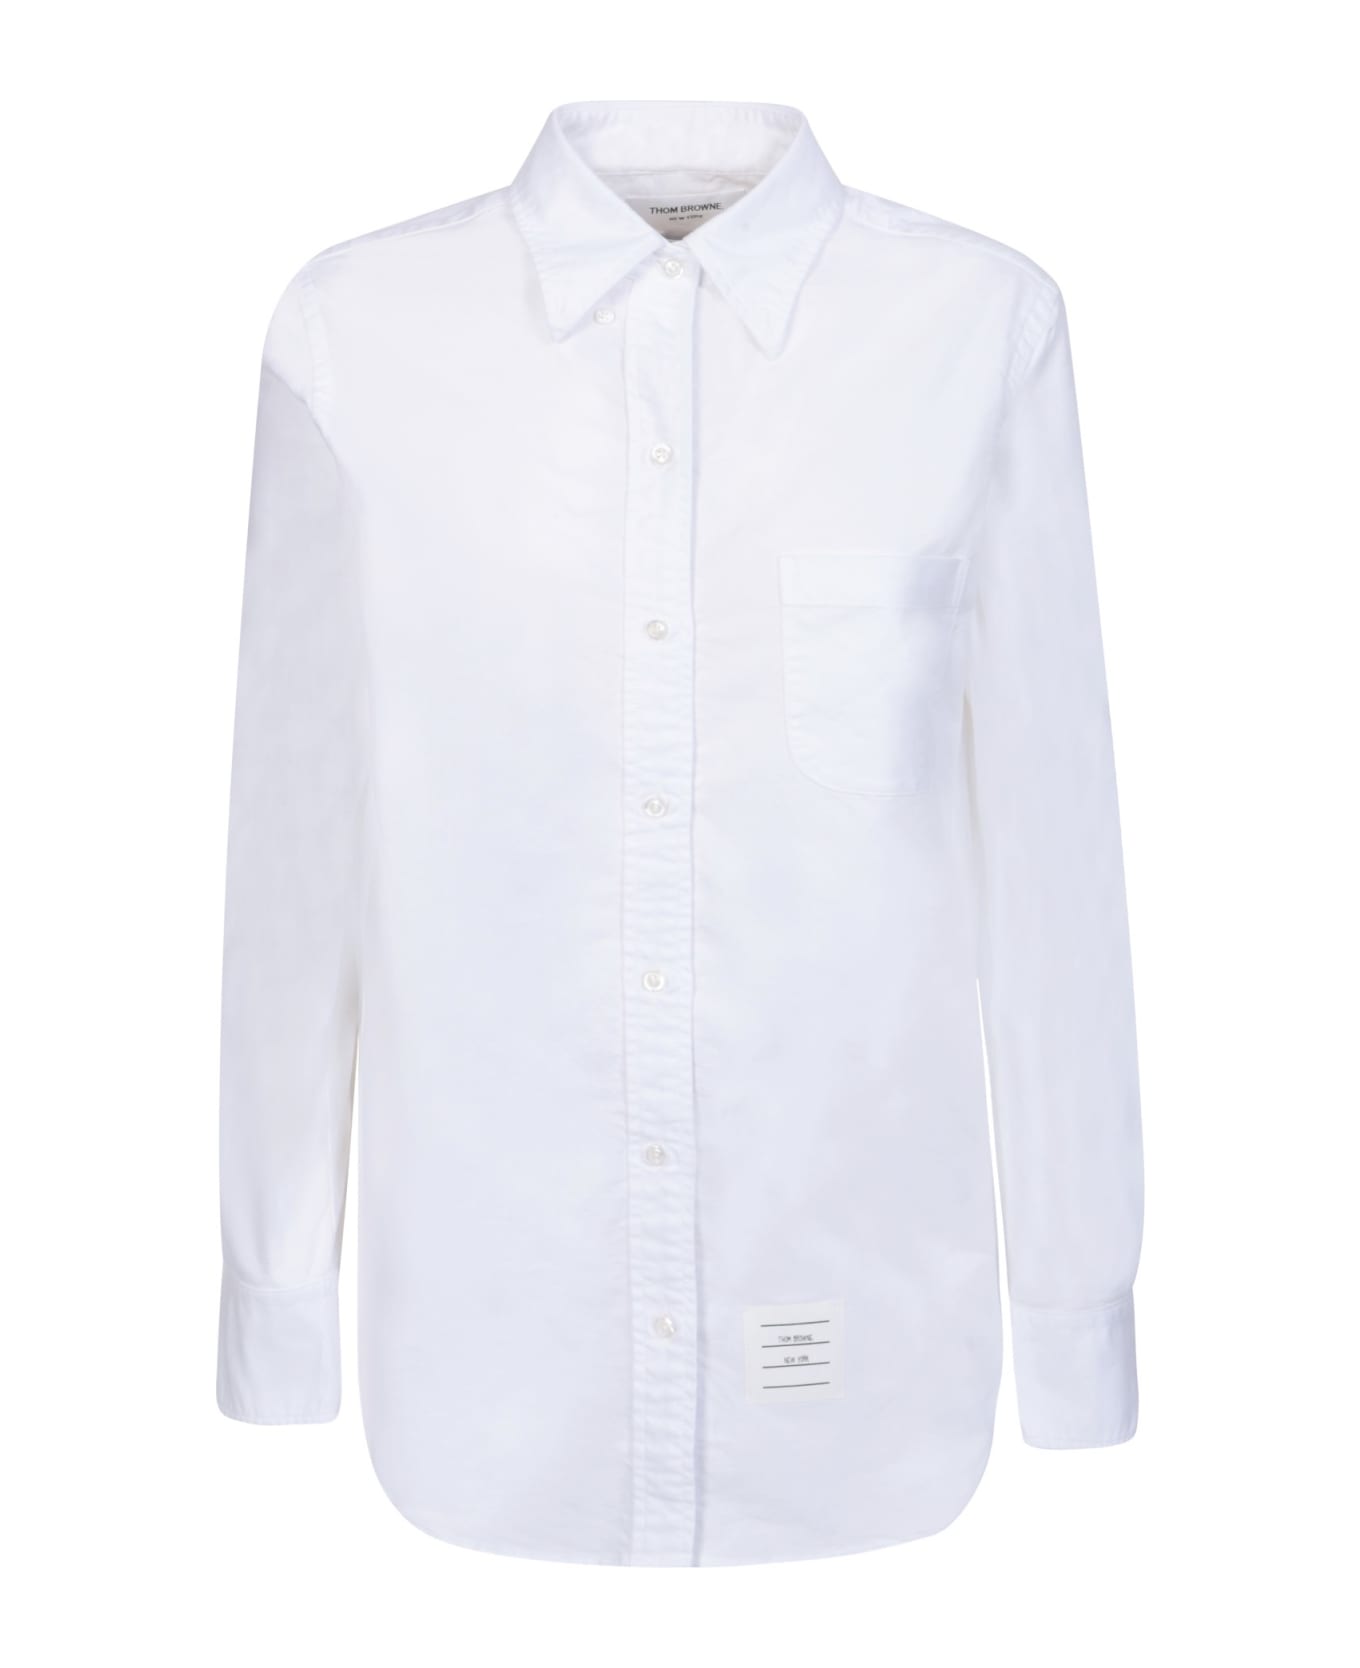 Thom Browne 'classic Point Collar' Cotton Shirt - WHITE シャツ